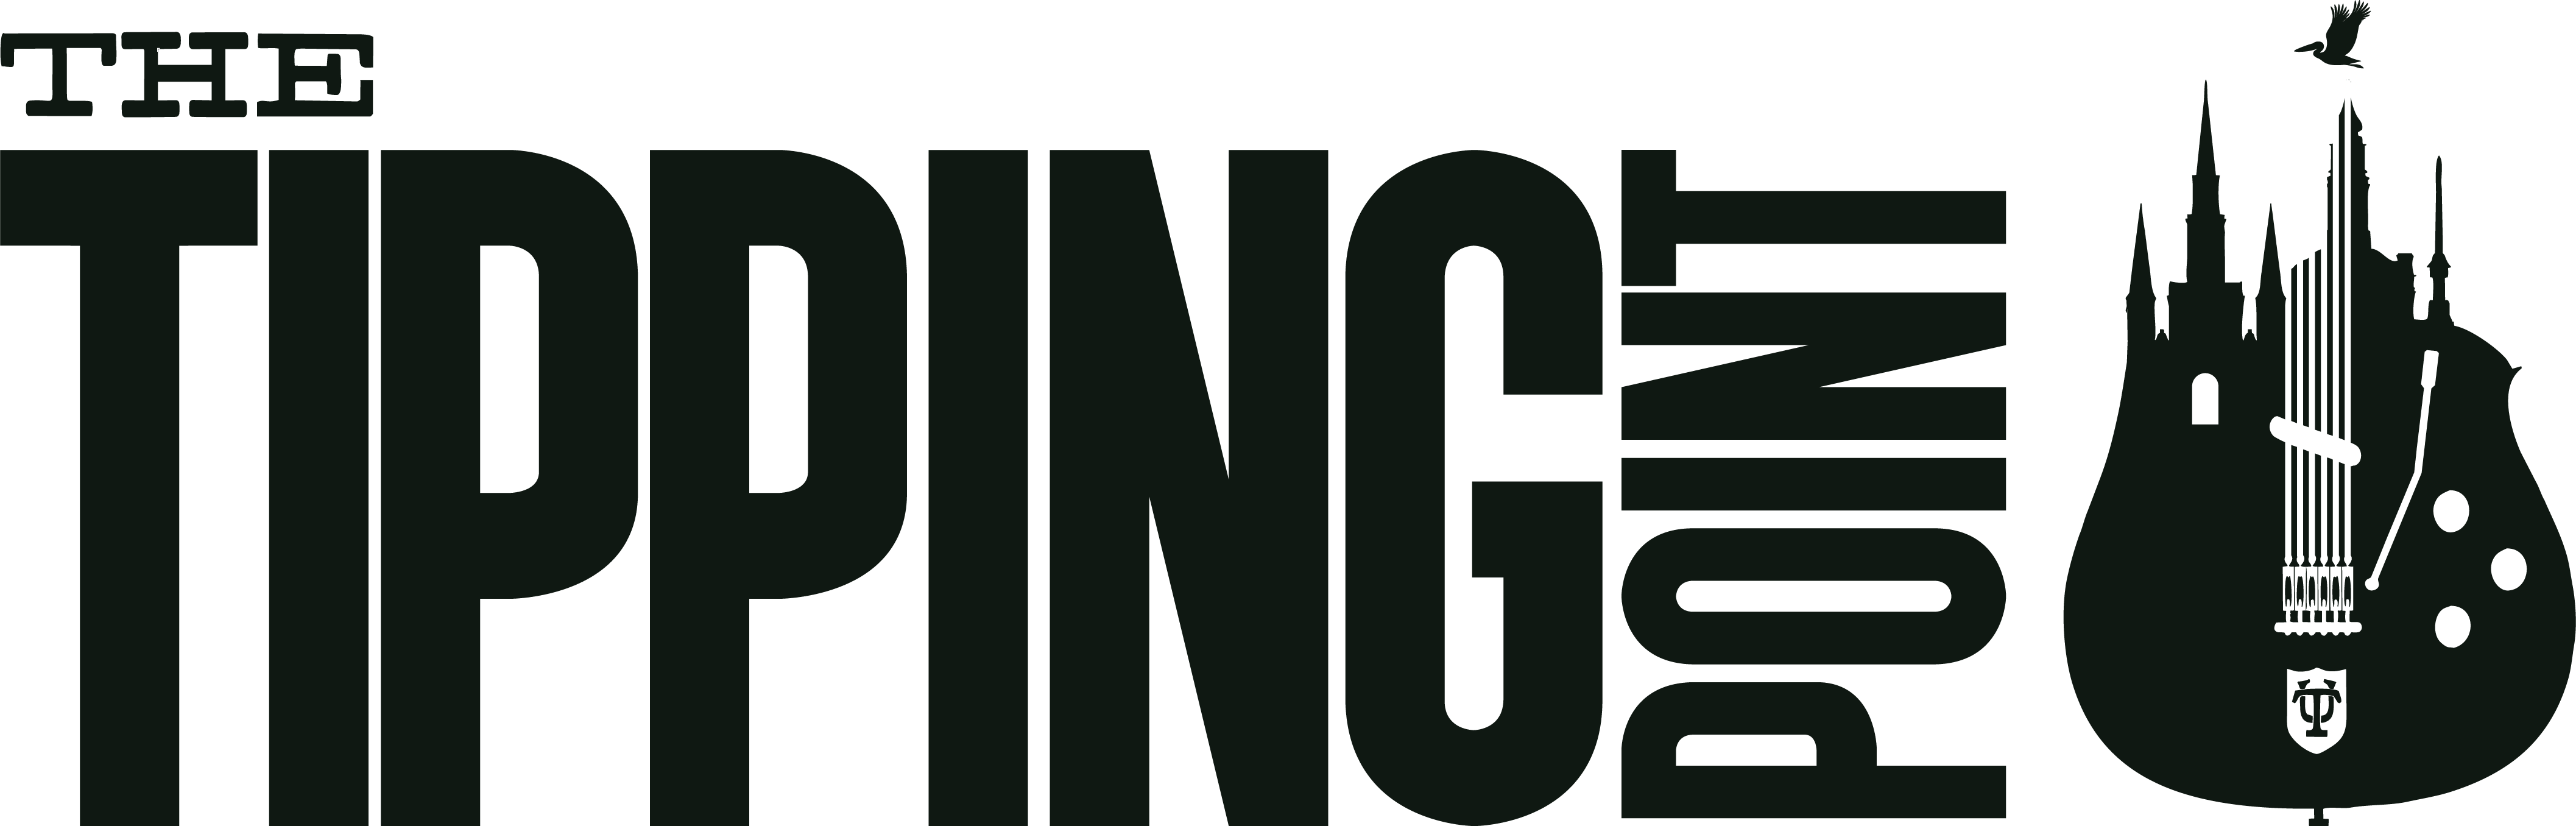 The Tipping Point Logo